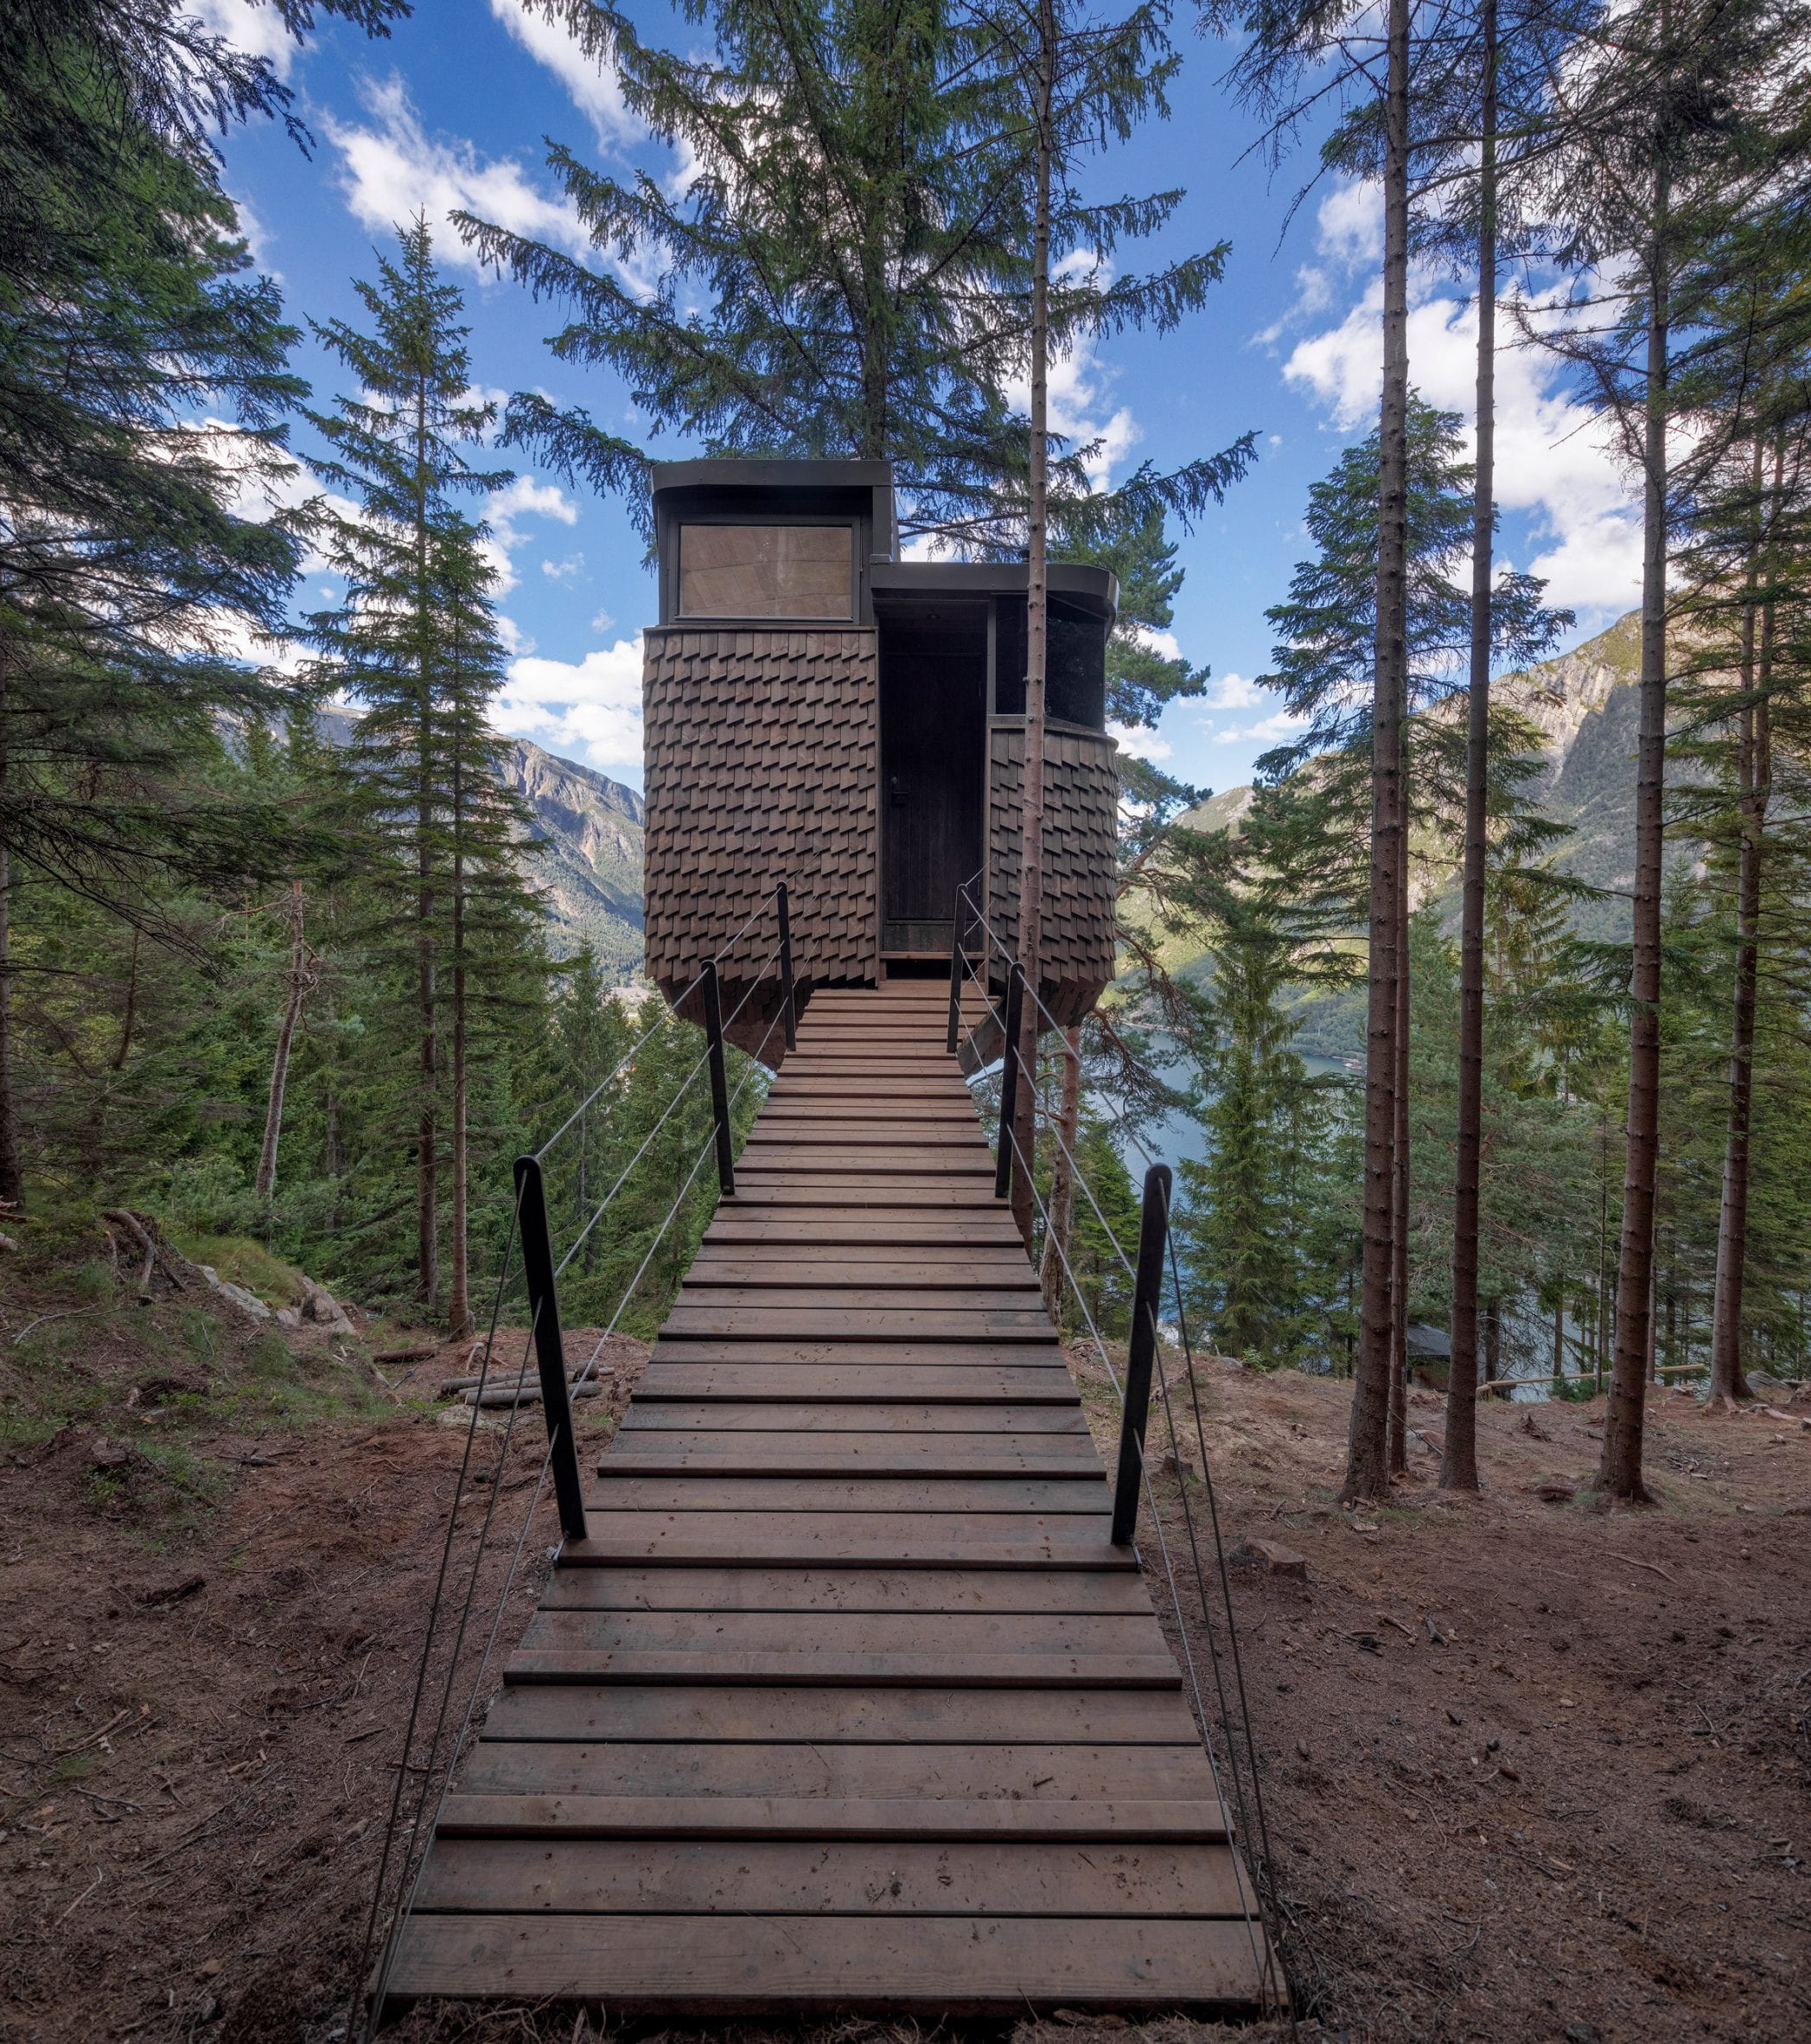  The woodnest treehouses lie in a pine forest